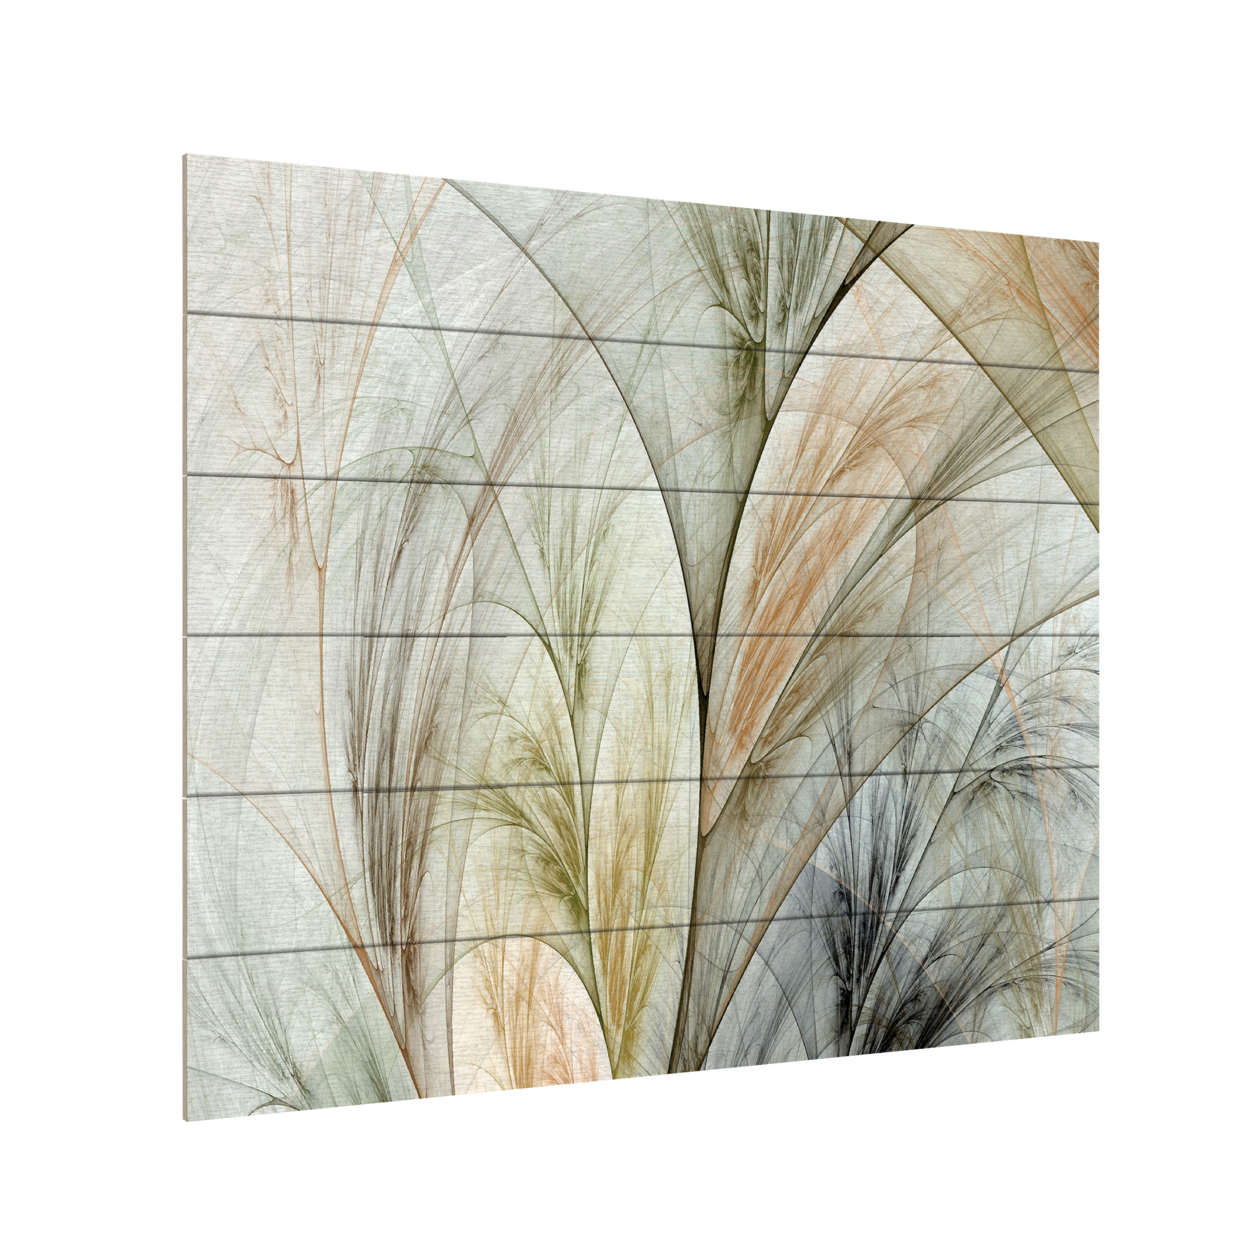 Wooden Slat Art 18 X 22 Inches Titled Fractal Grass V Ready To Hang Home Decor Picture